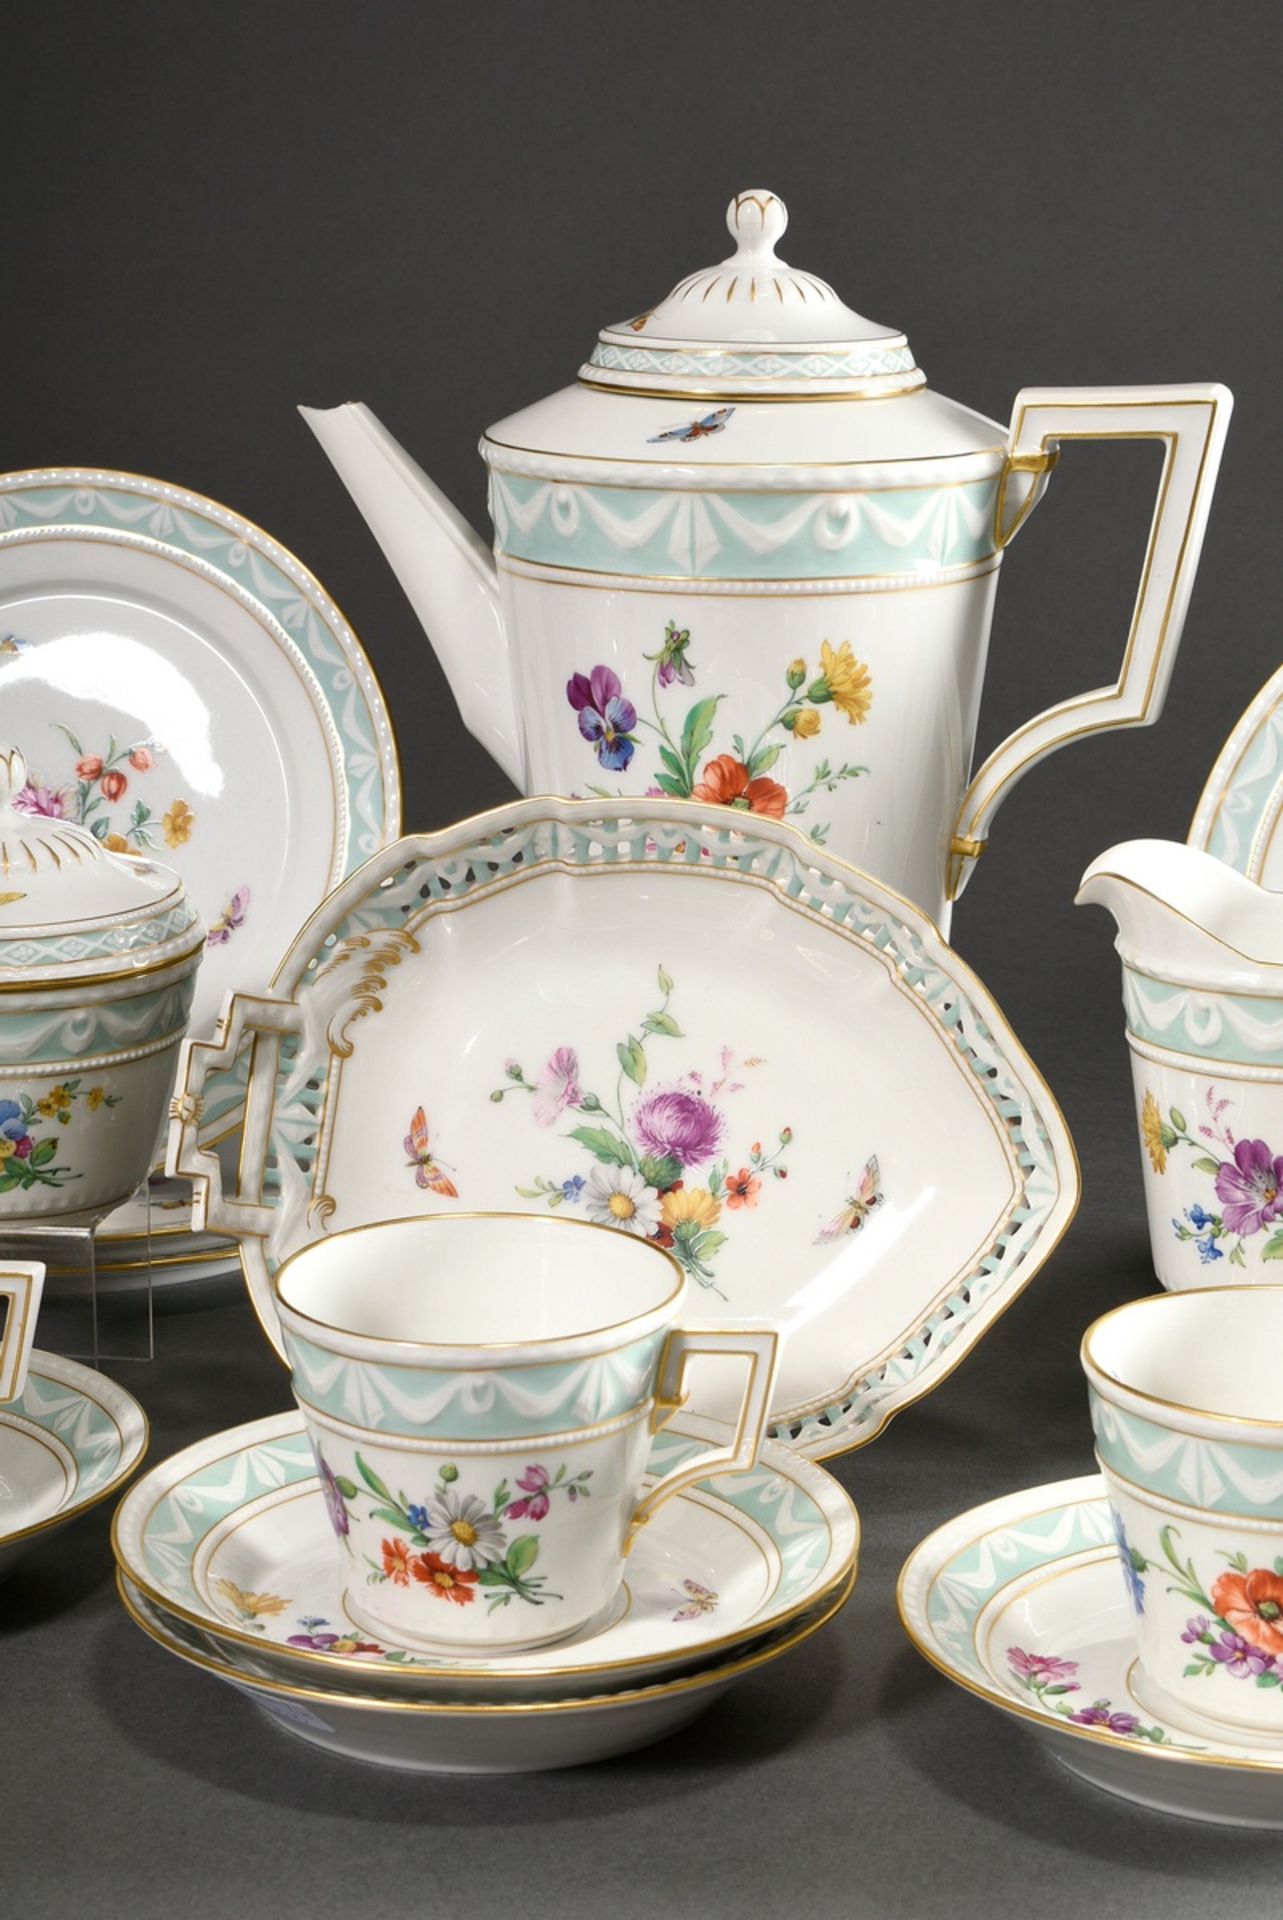 15 Pieces KPM coffee service "Kurland" with flowers and insects, gold staffage and turquoise frieze - Image 3 of 10